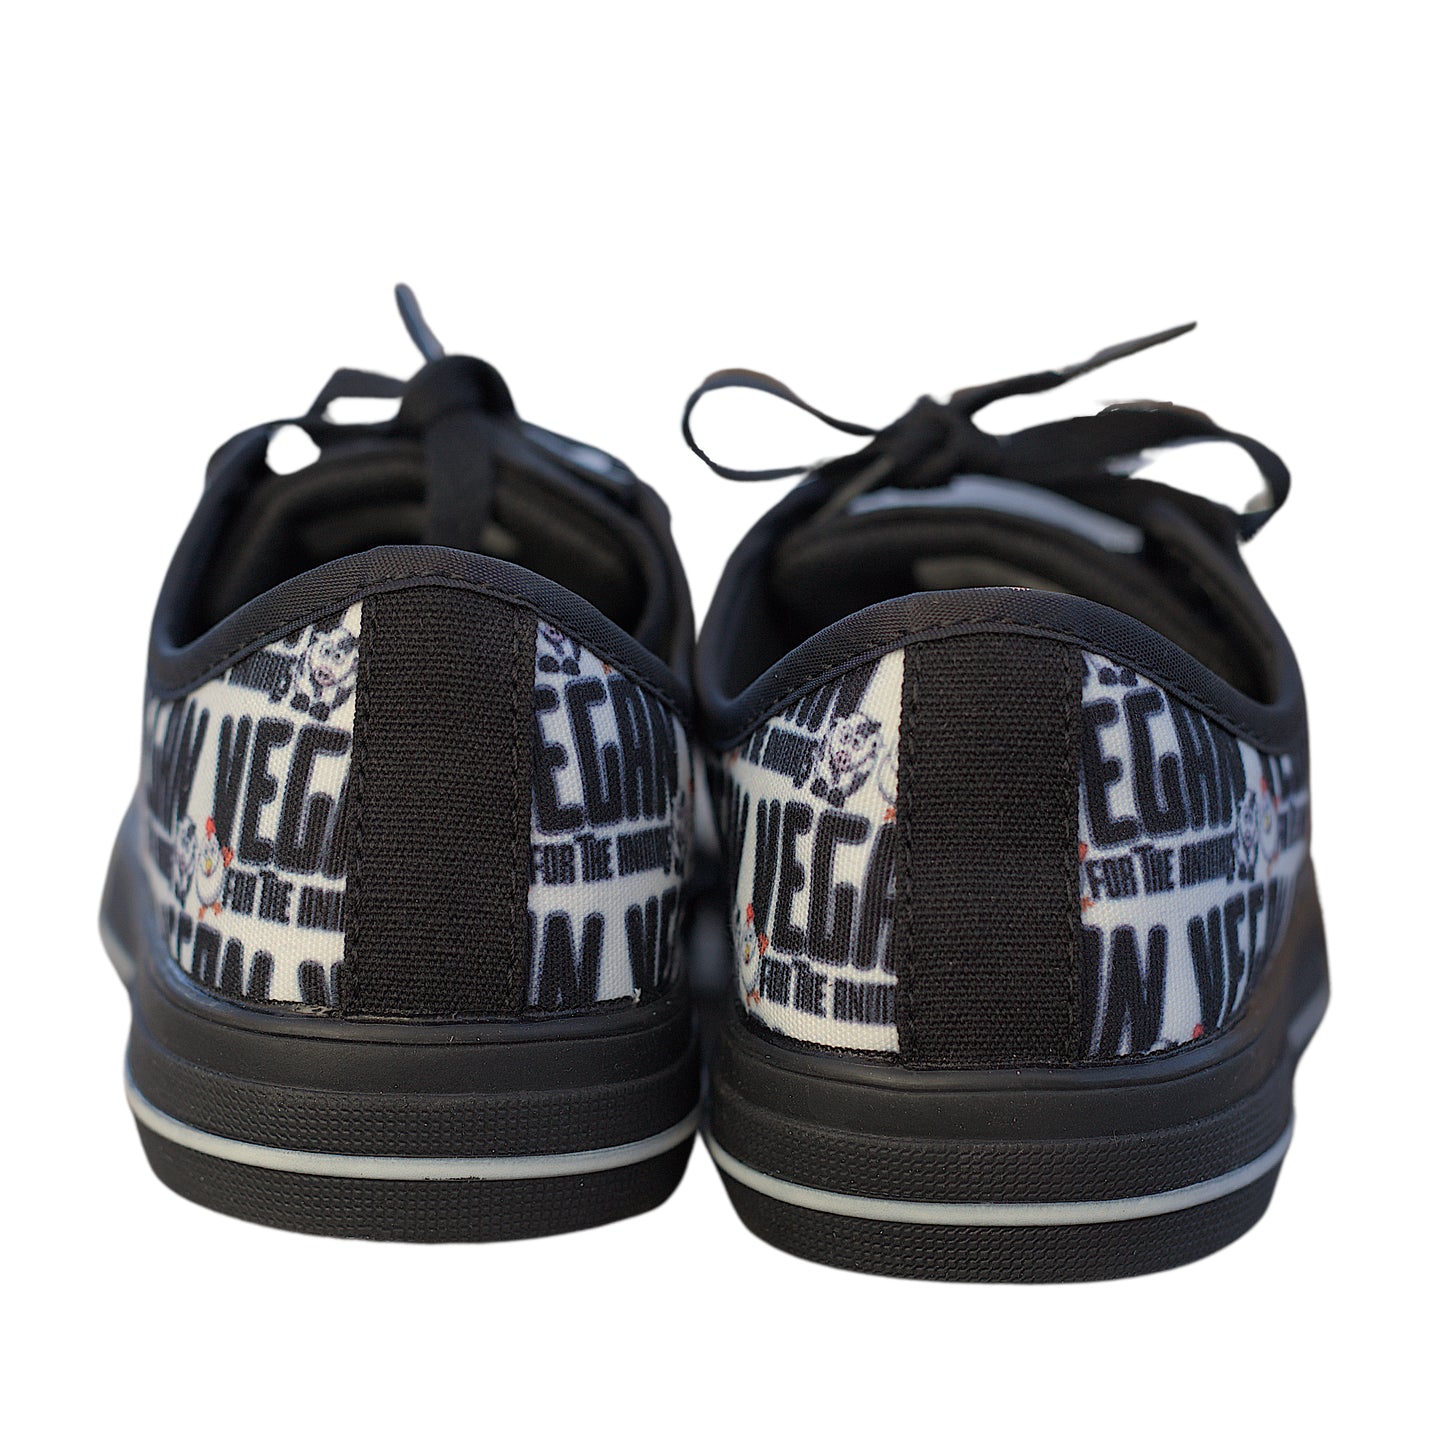 VEGAN For The Animals Low Top Canvas Shoes